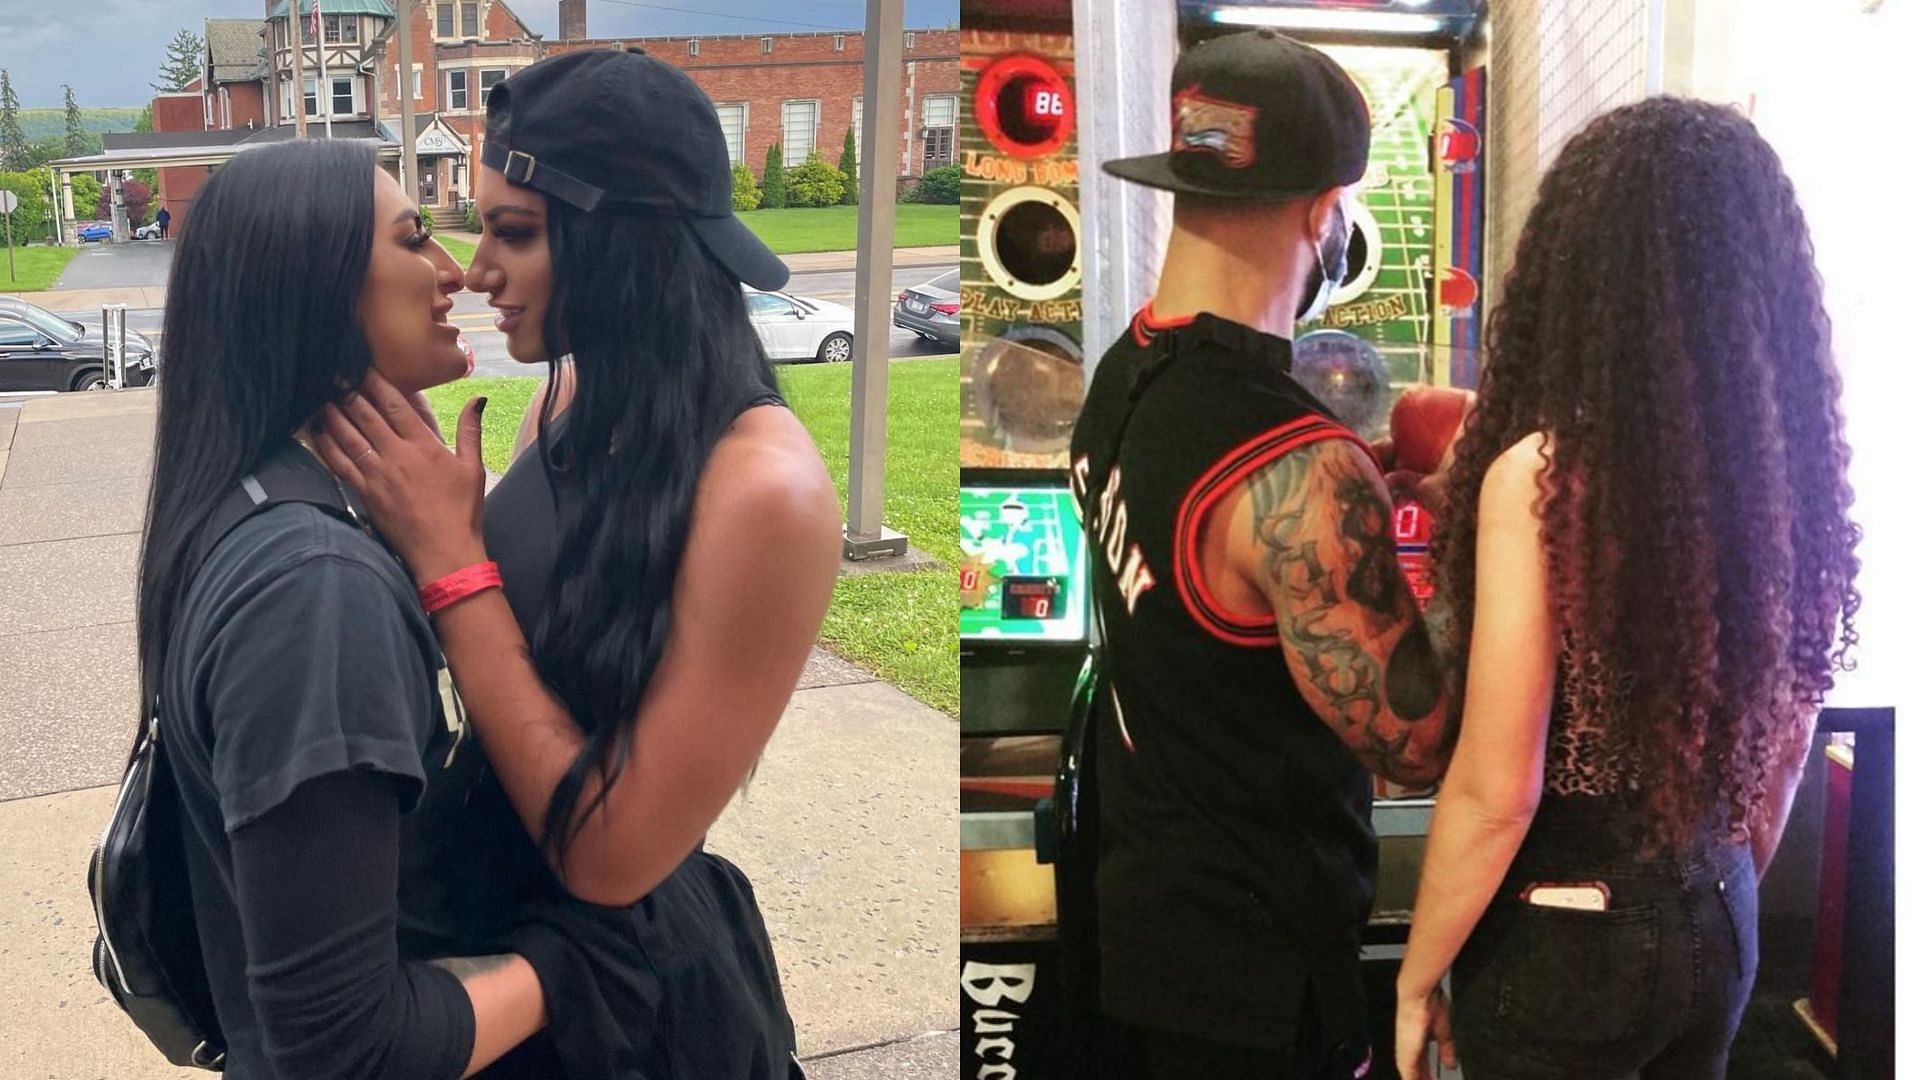 Sonya Deville with her girlfriend (left) and Ricochet with Samantha Irvin (right)